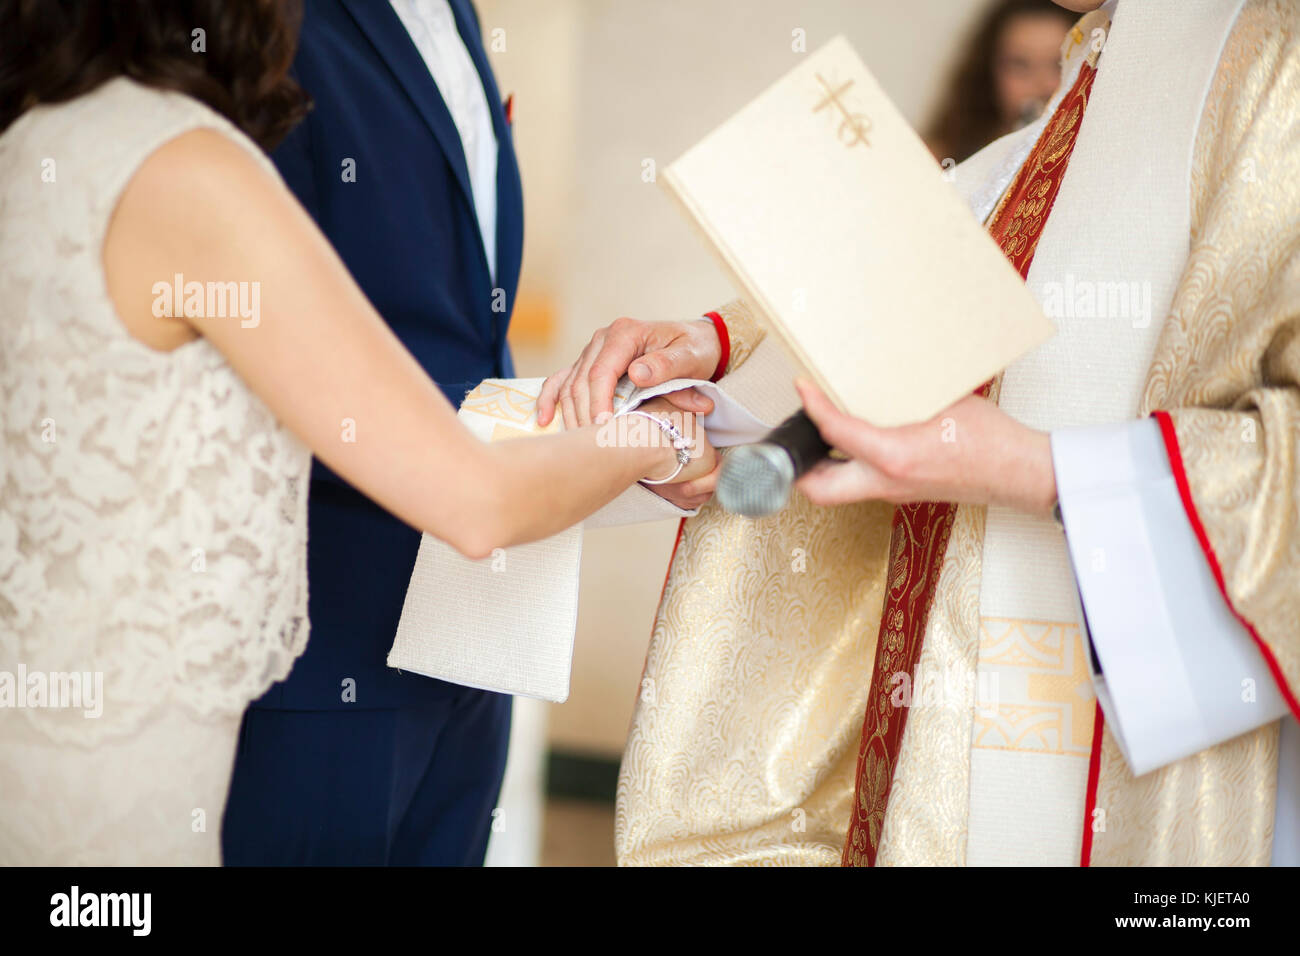 Priest and couple joining hands in wedding Stock Photo